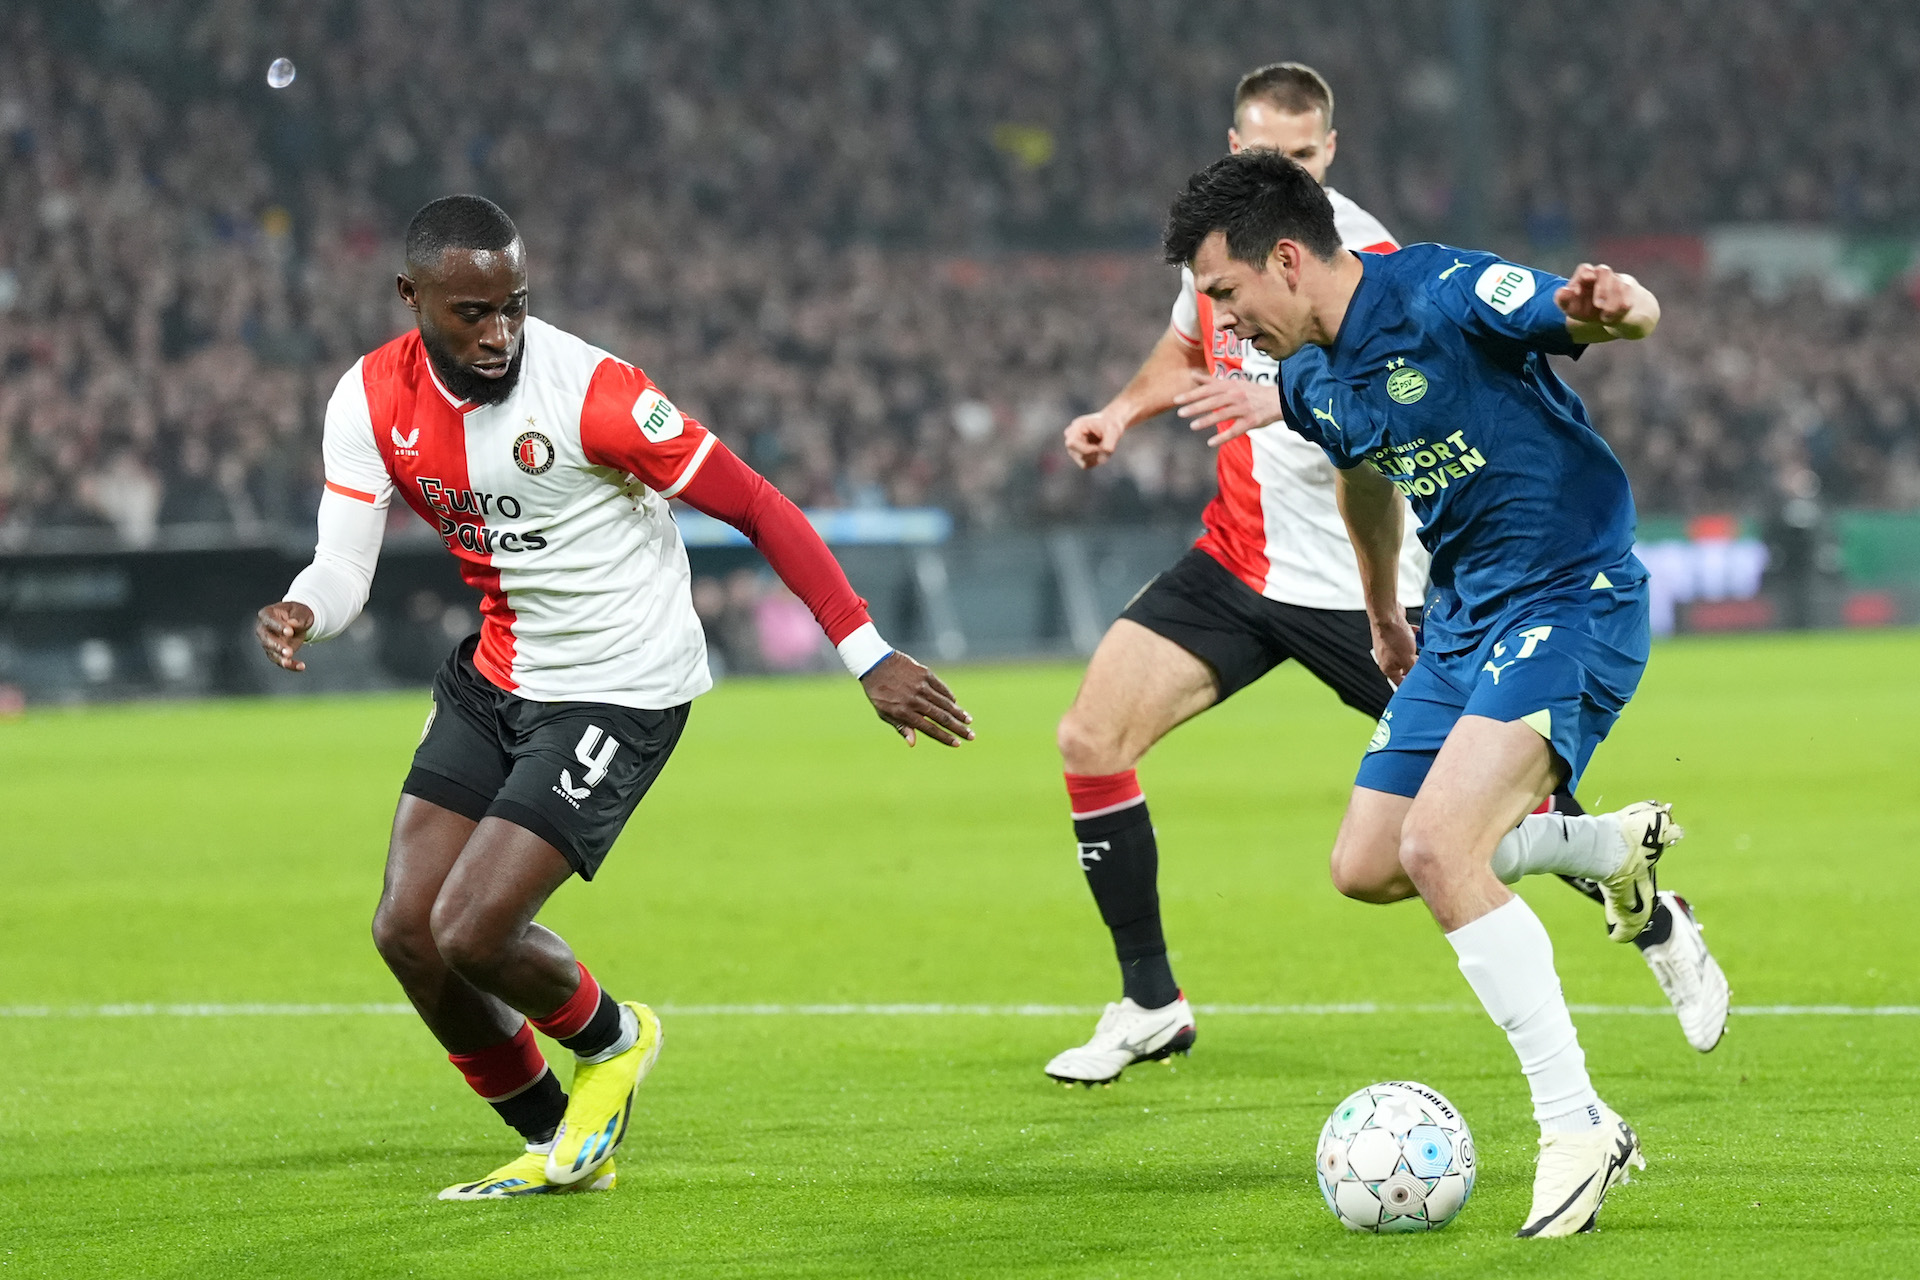 PSV regains control of the game